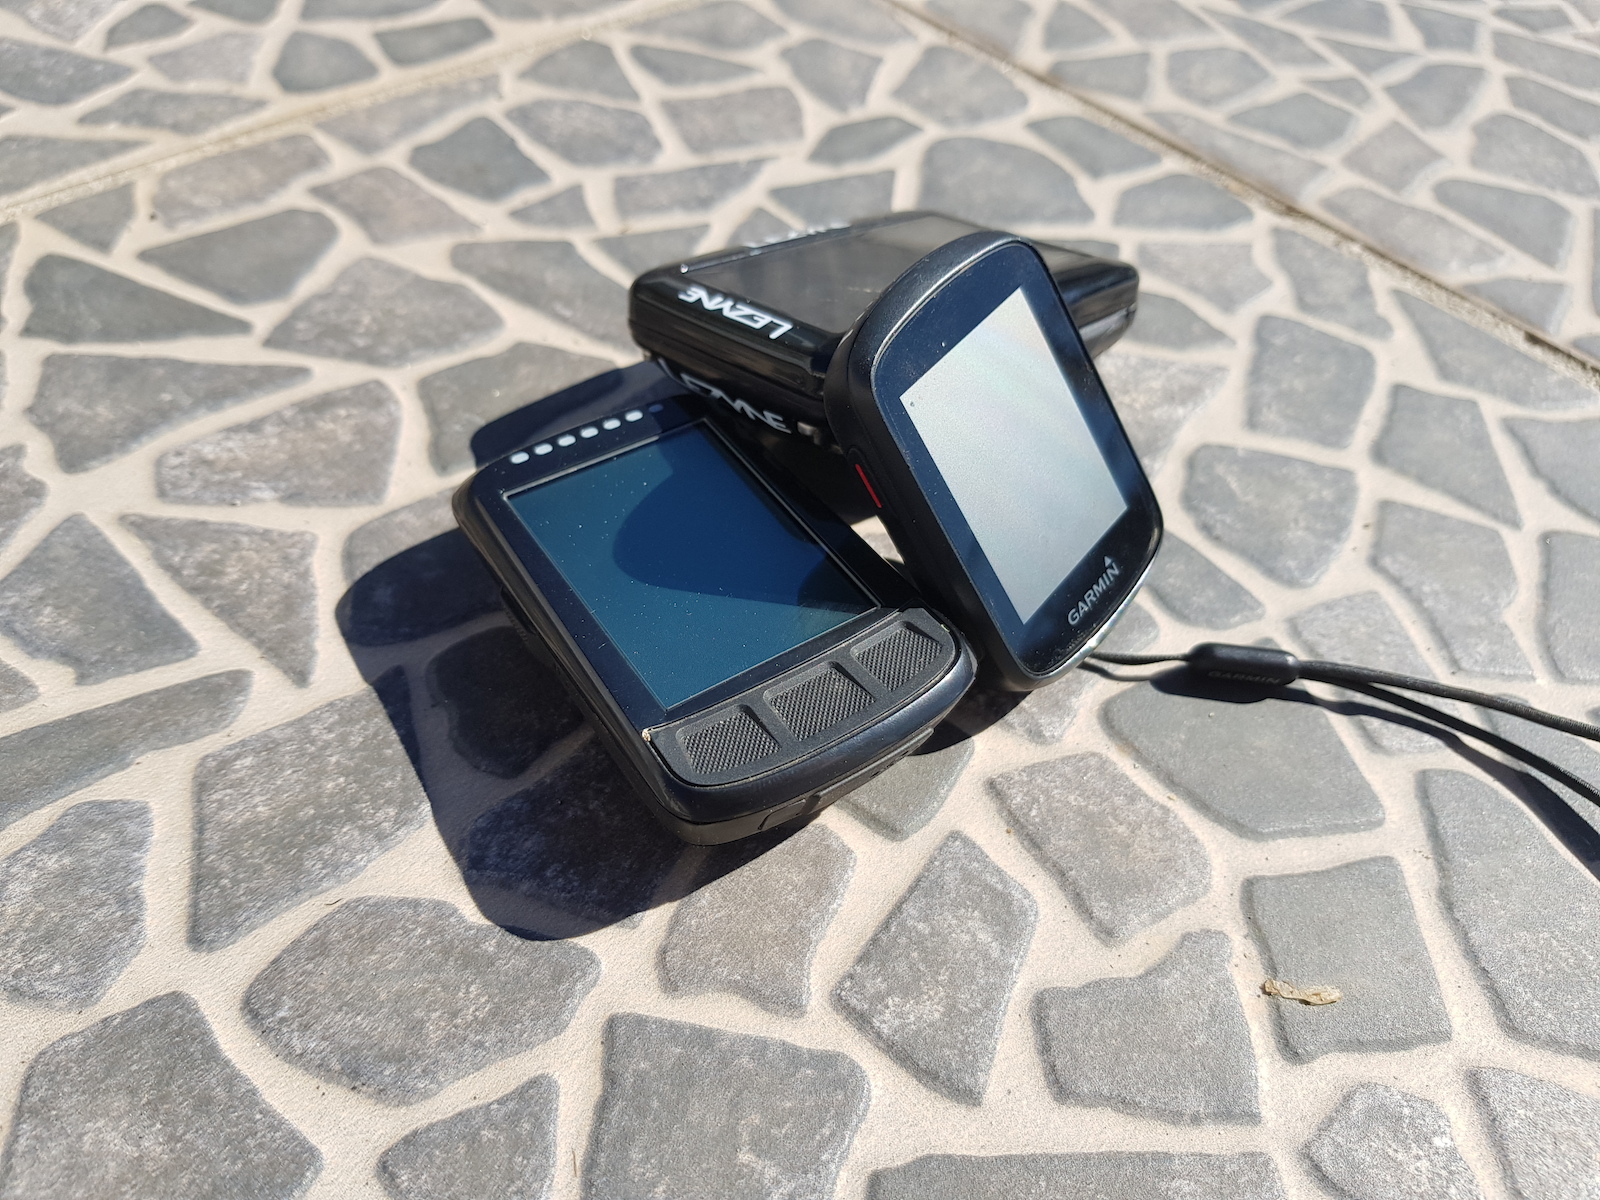 Review 3 of the Best Entry Level GPS Cycling Computers for 2021